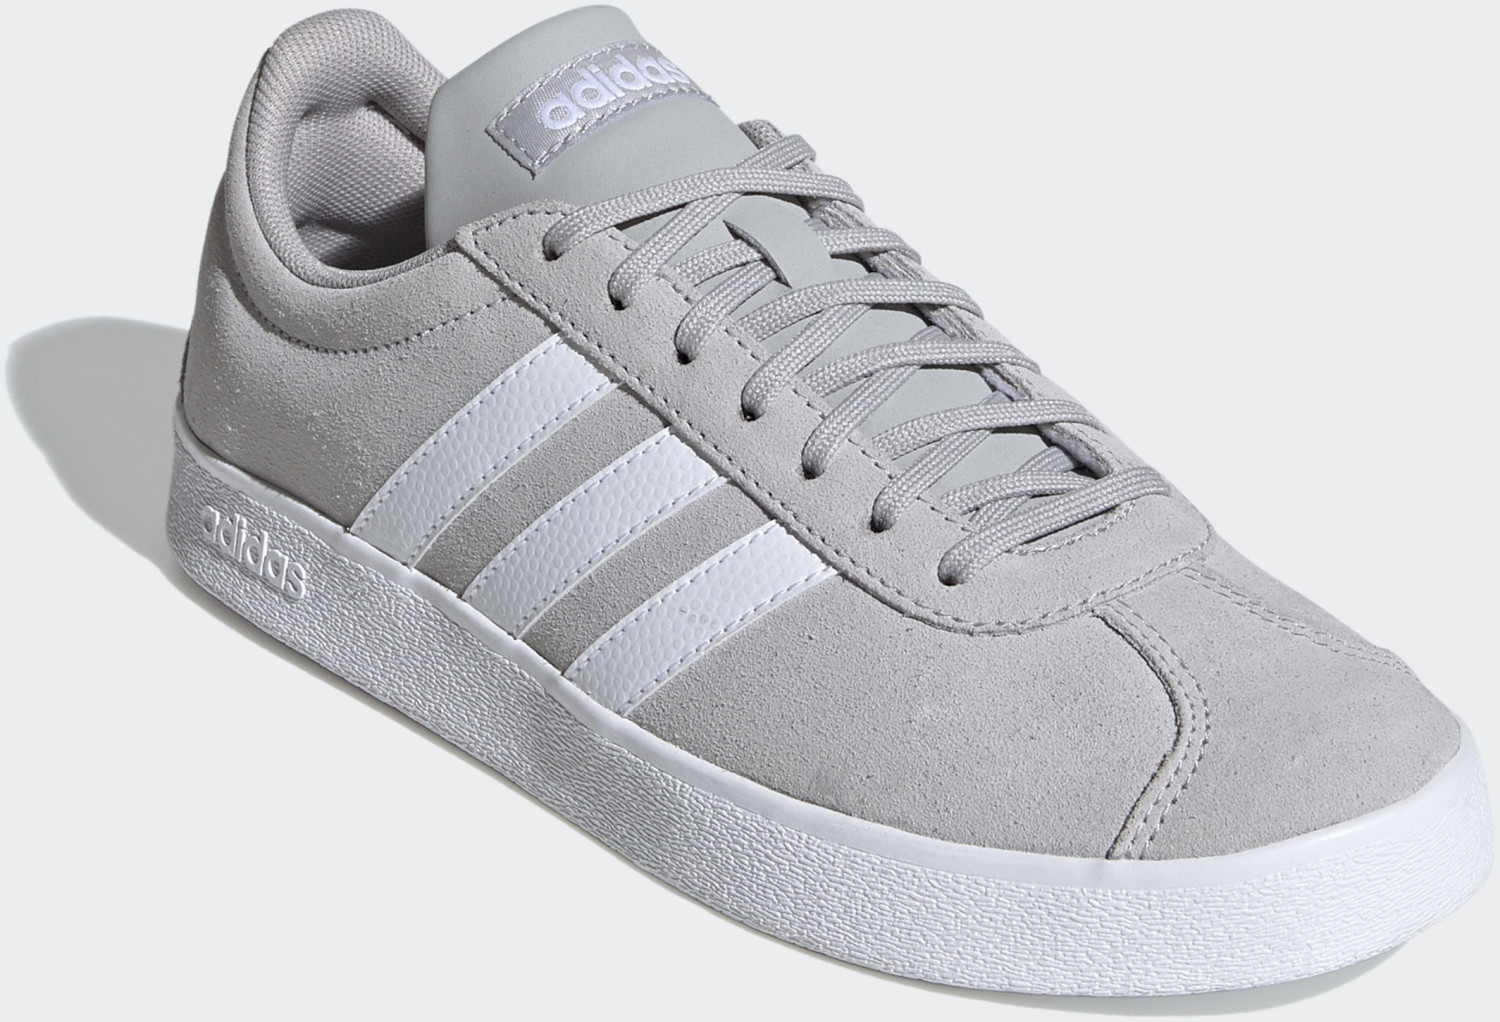 Buy Adidas VL Court 2.0 Women grey two/cloud white/dove grey from £40. ...